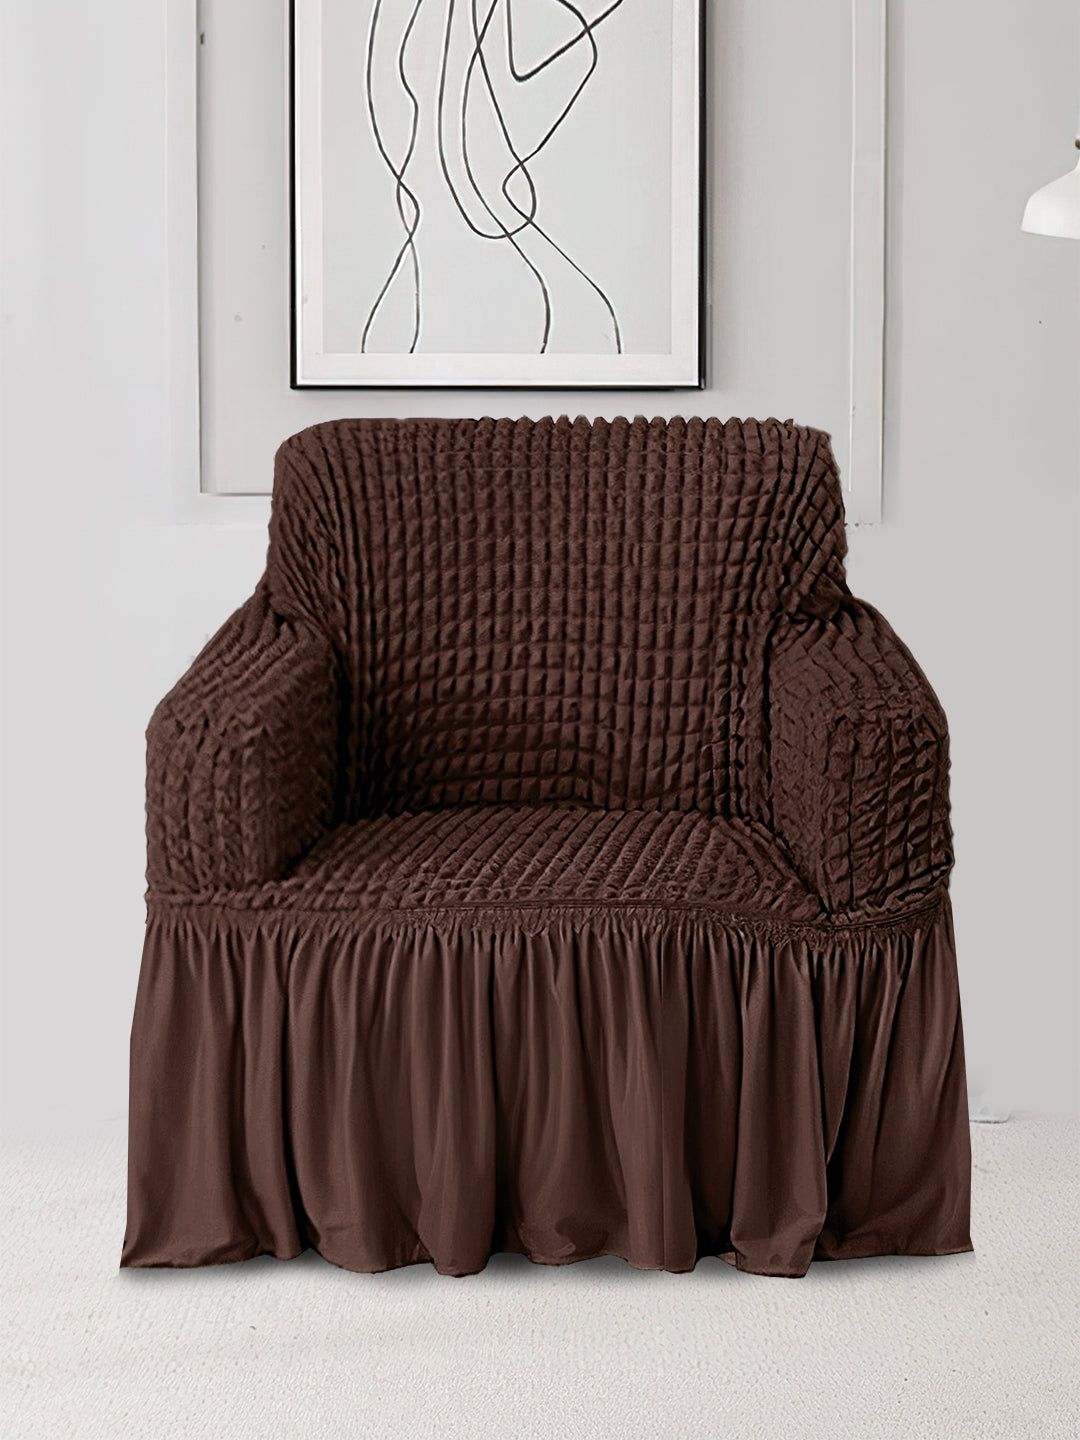 1 Seater Brown